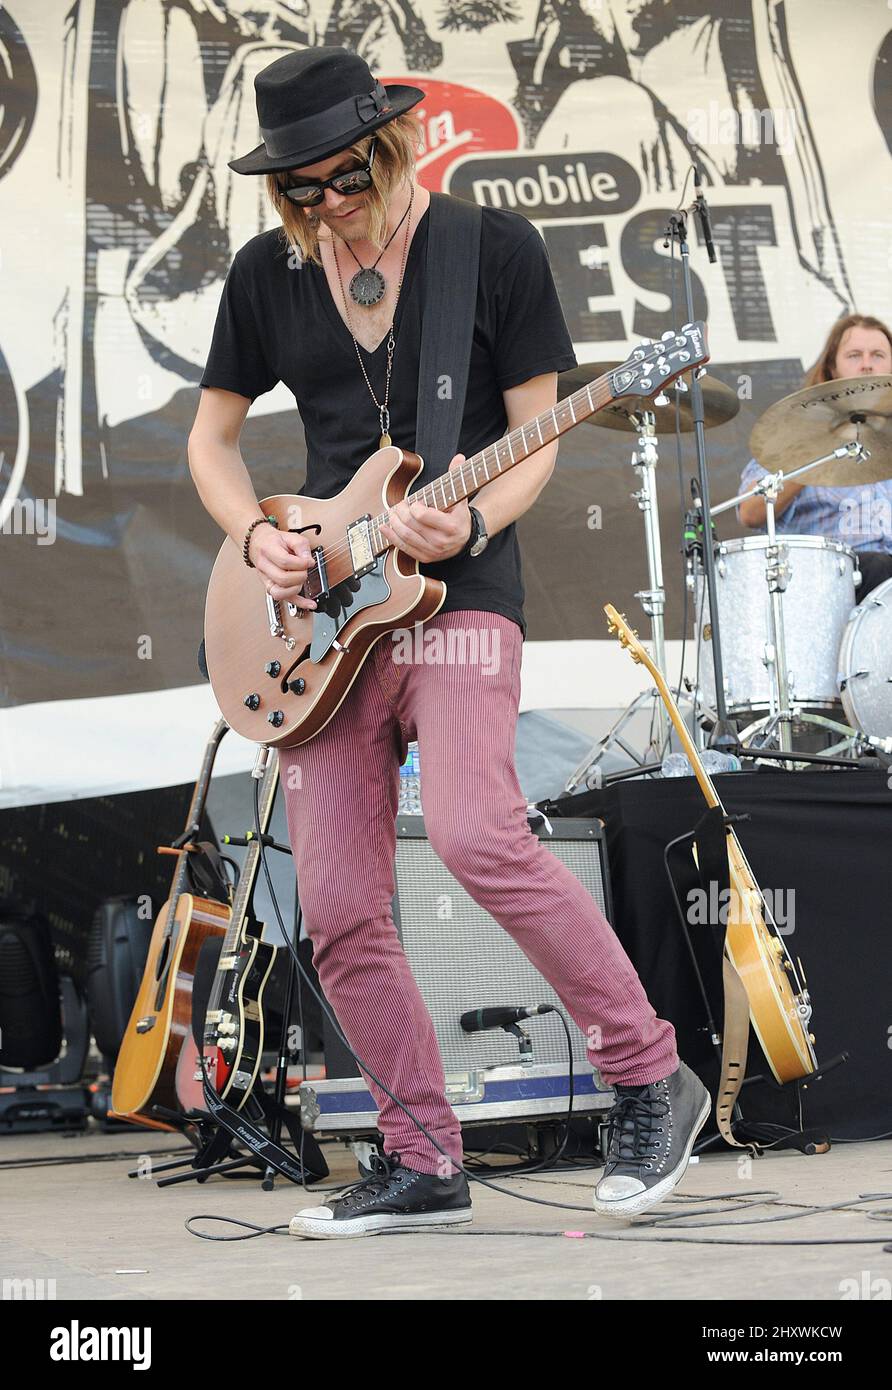 Alberta Cross, Petter Ericson Stakee performs at The 2011 Virgin Music Festival Freefest that took place at Merriweather Post Pavilion in Columbia, Md. Stock Photo